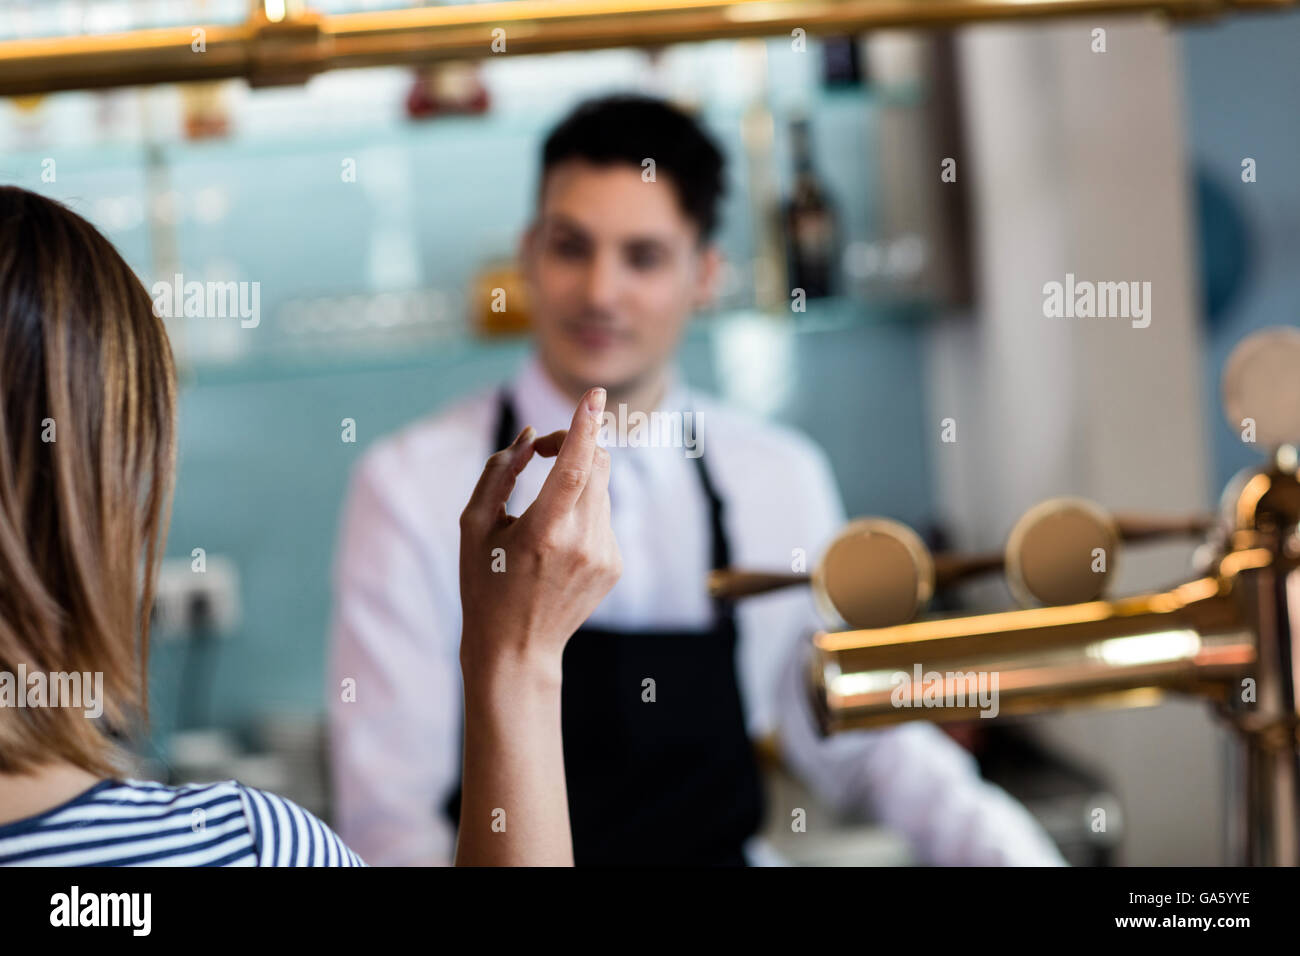 Woman gesturing while talking with bartender Stock Photo